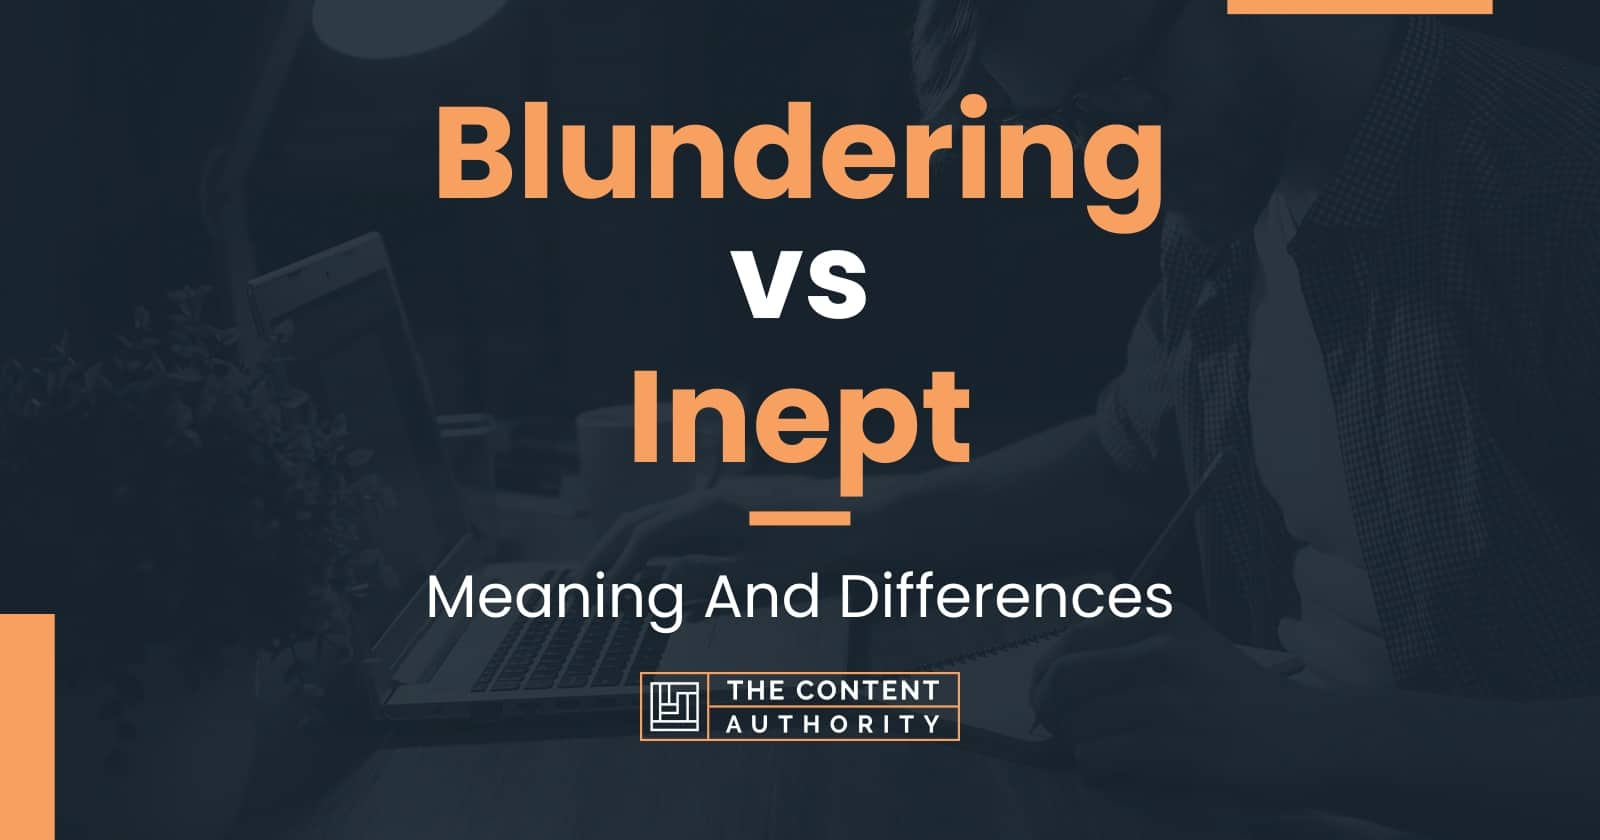 Blundering vs Inept: Meaning And Differences